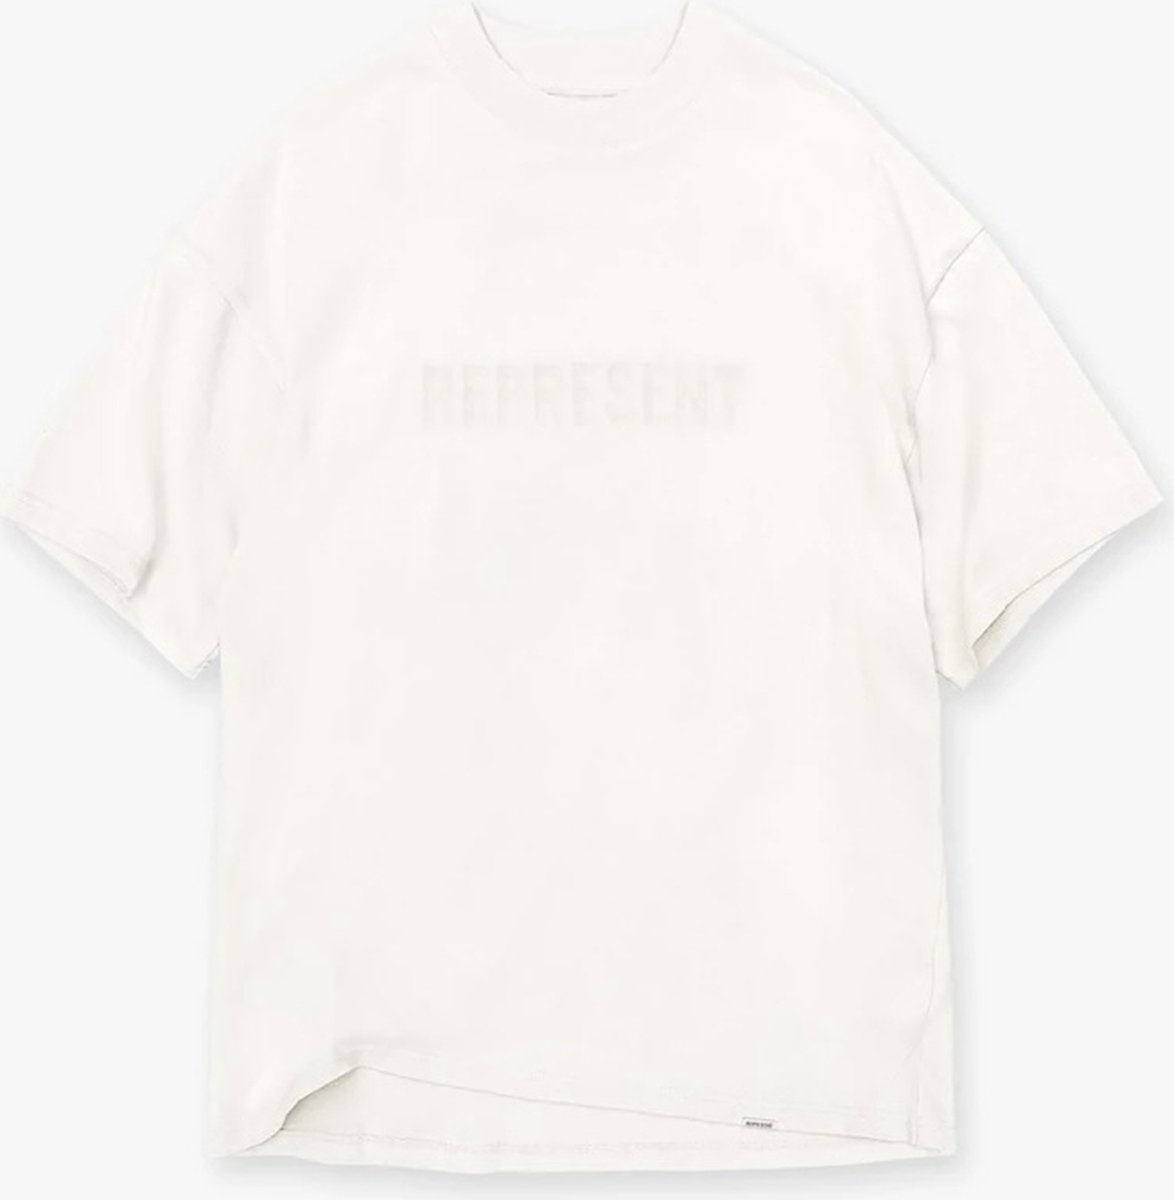 Represent, Embroidered Logo T-Shirt, Flat White, M05141-72, Size S